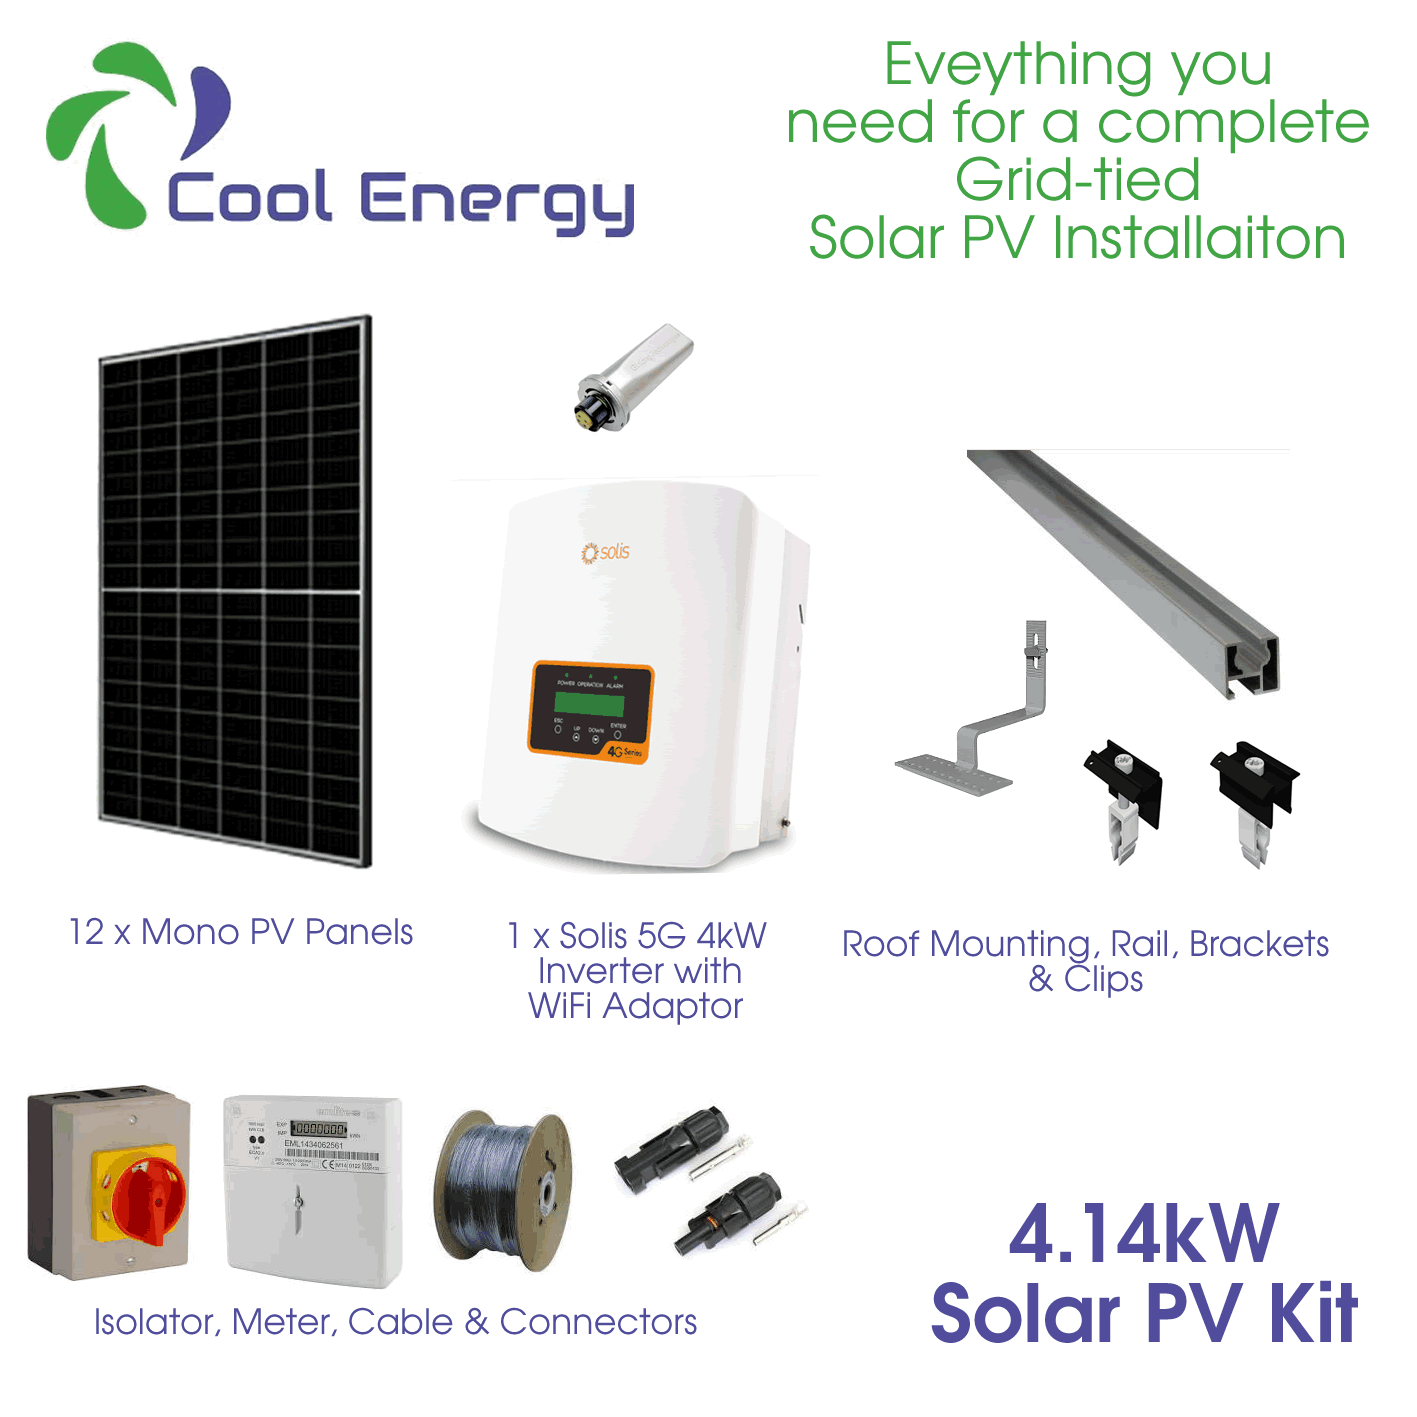 Cool Energy 4.14kW Solar PV Kit CE-PVKIT3 - Solar PV - Cool Energy Shop